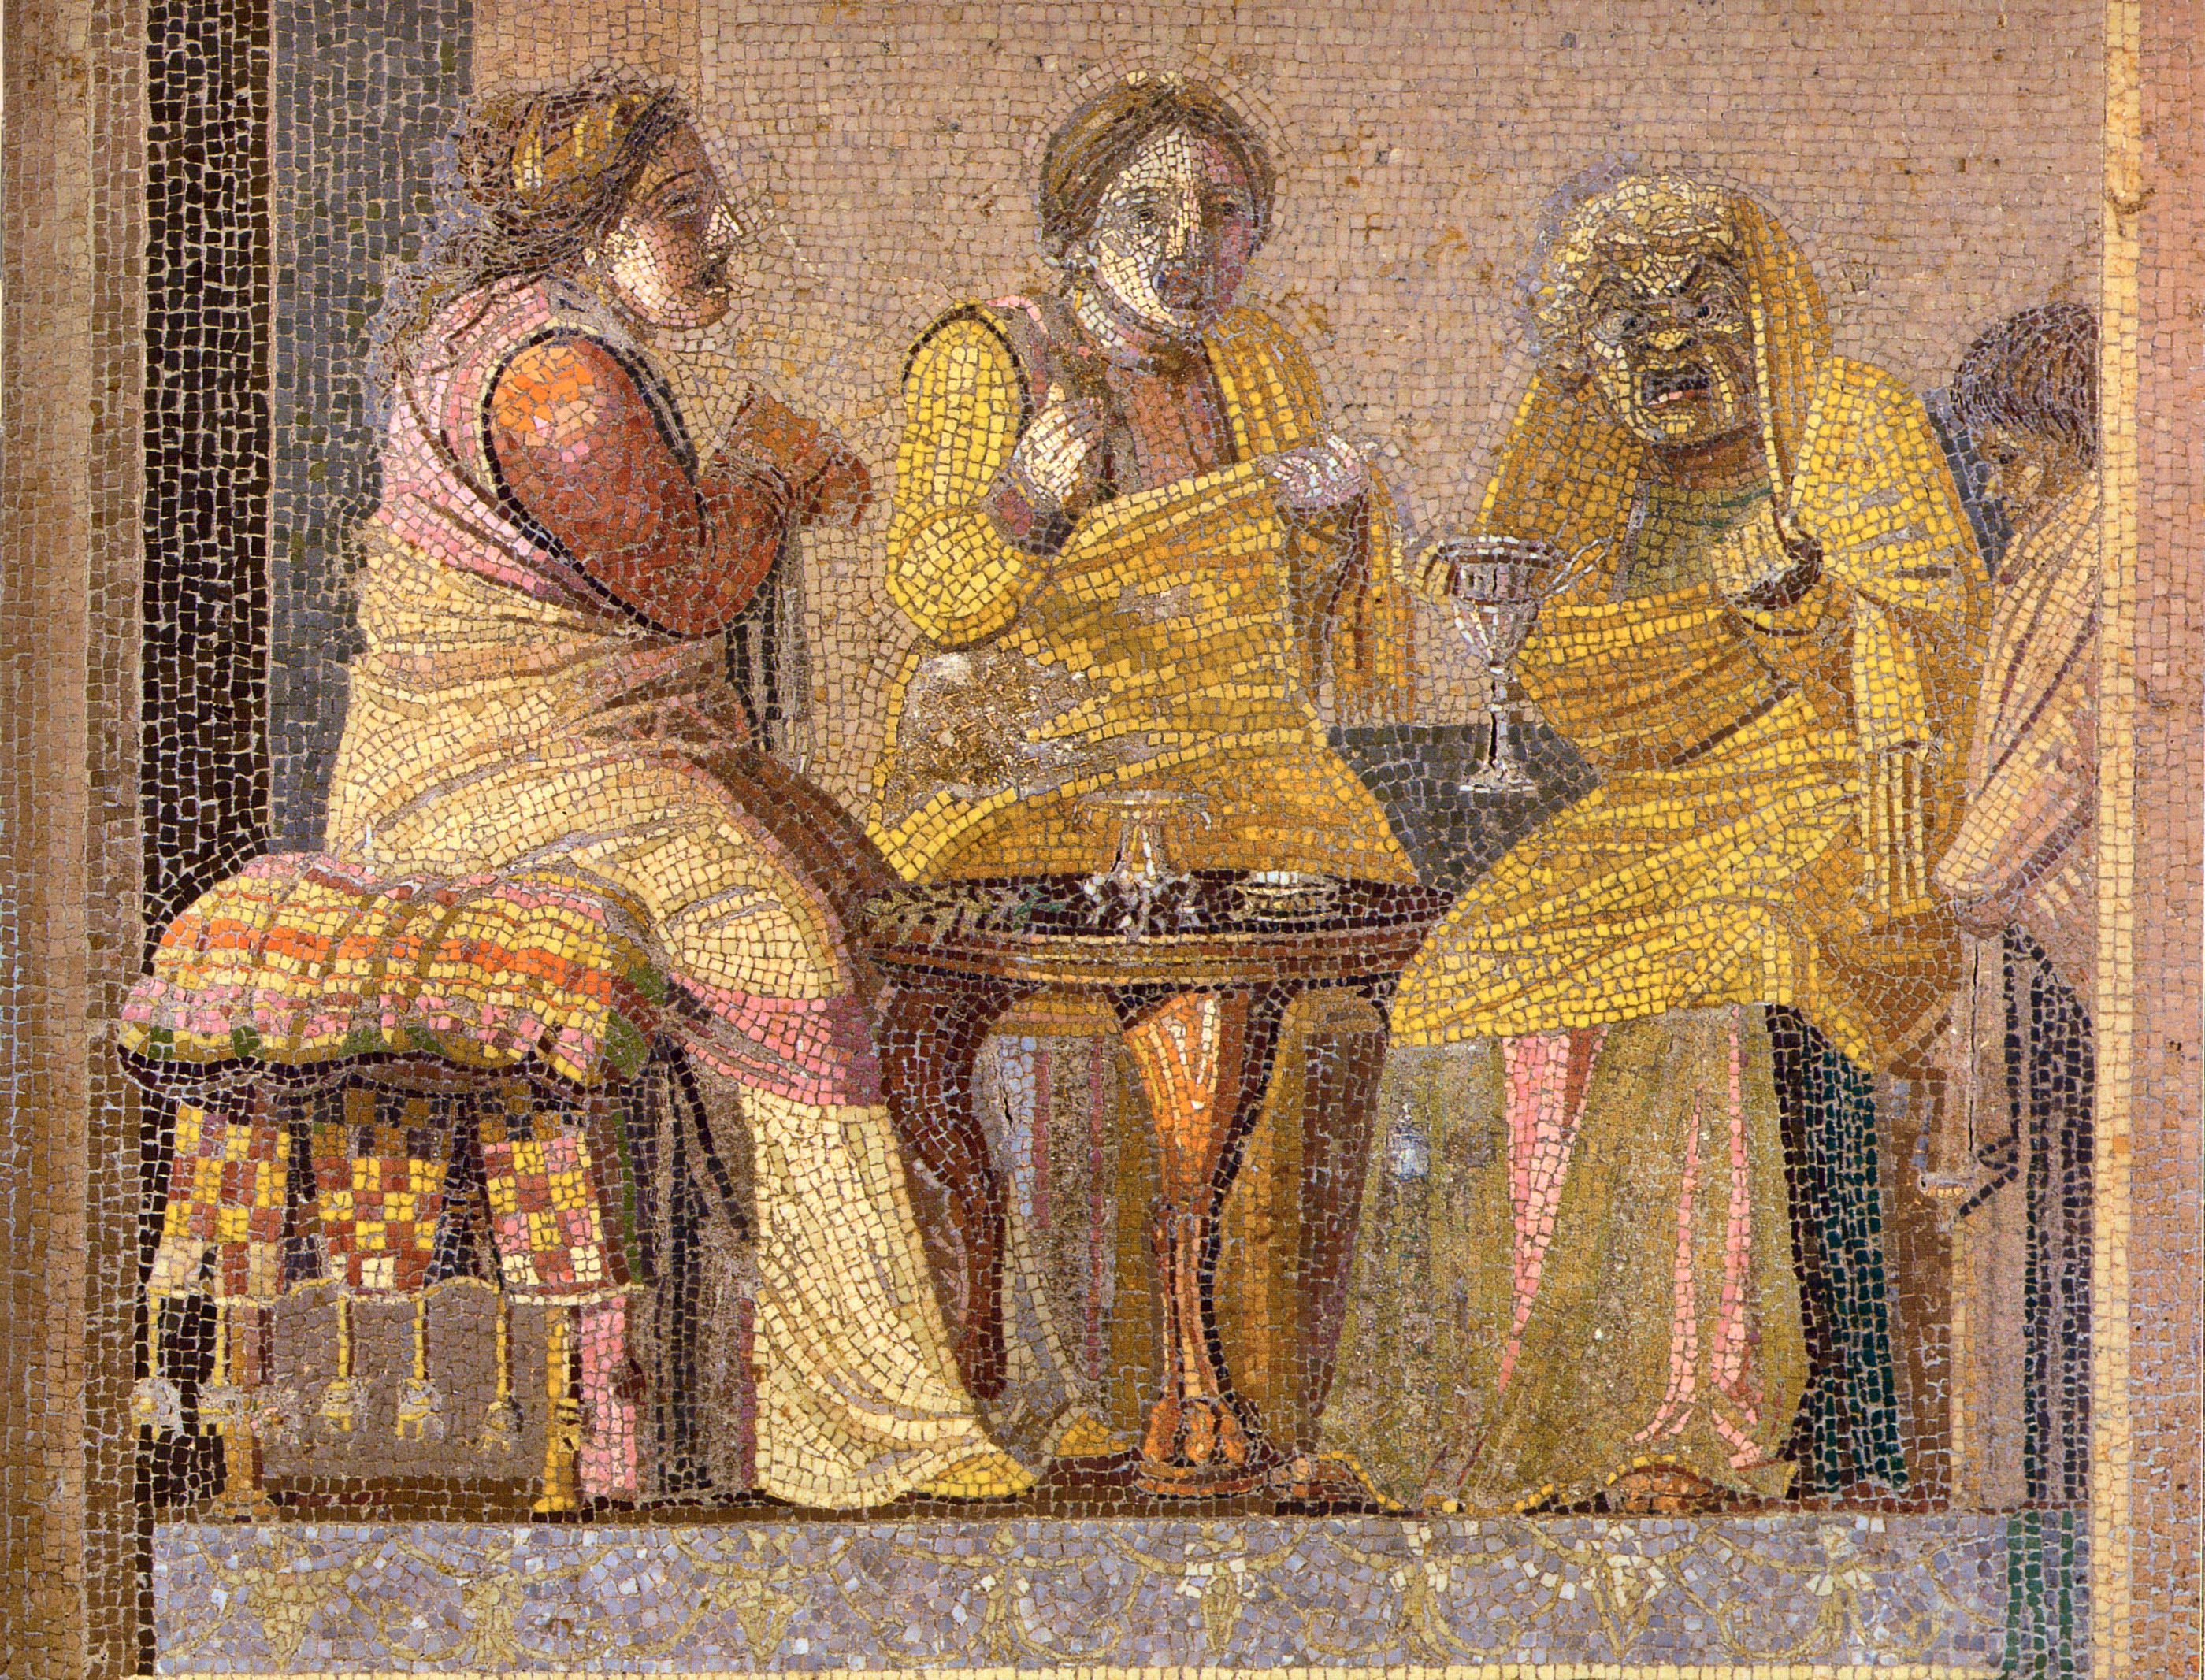 mosaic depicting three female figures wearing comic masks seated at a table